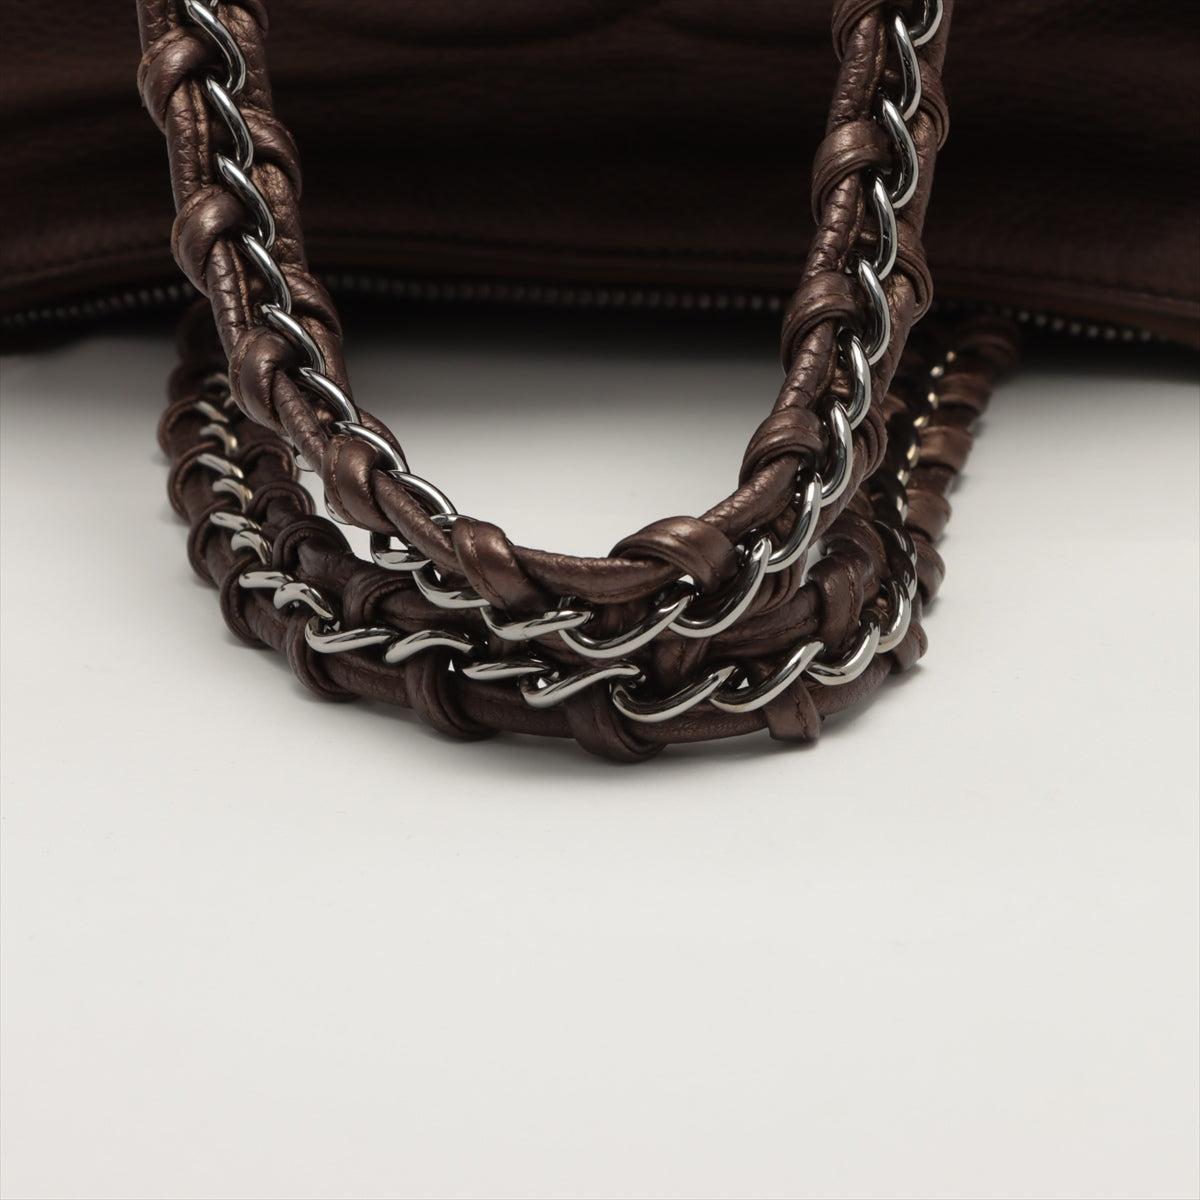 Chanel Coco Mark Leather Chain Shoulder Bag Brown Silver Metal Fittings 10XXXXXX